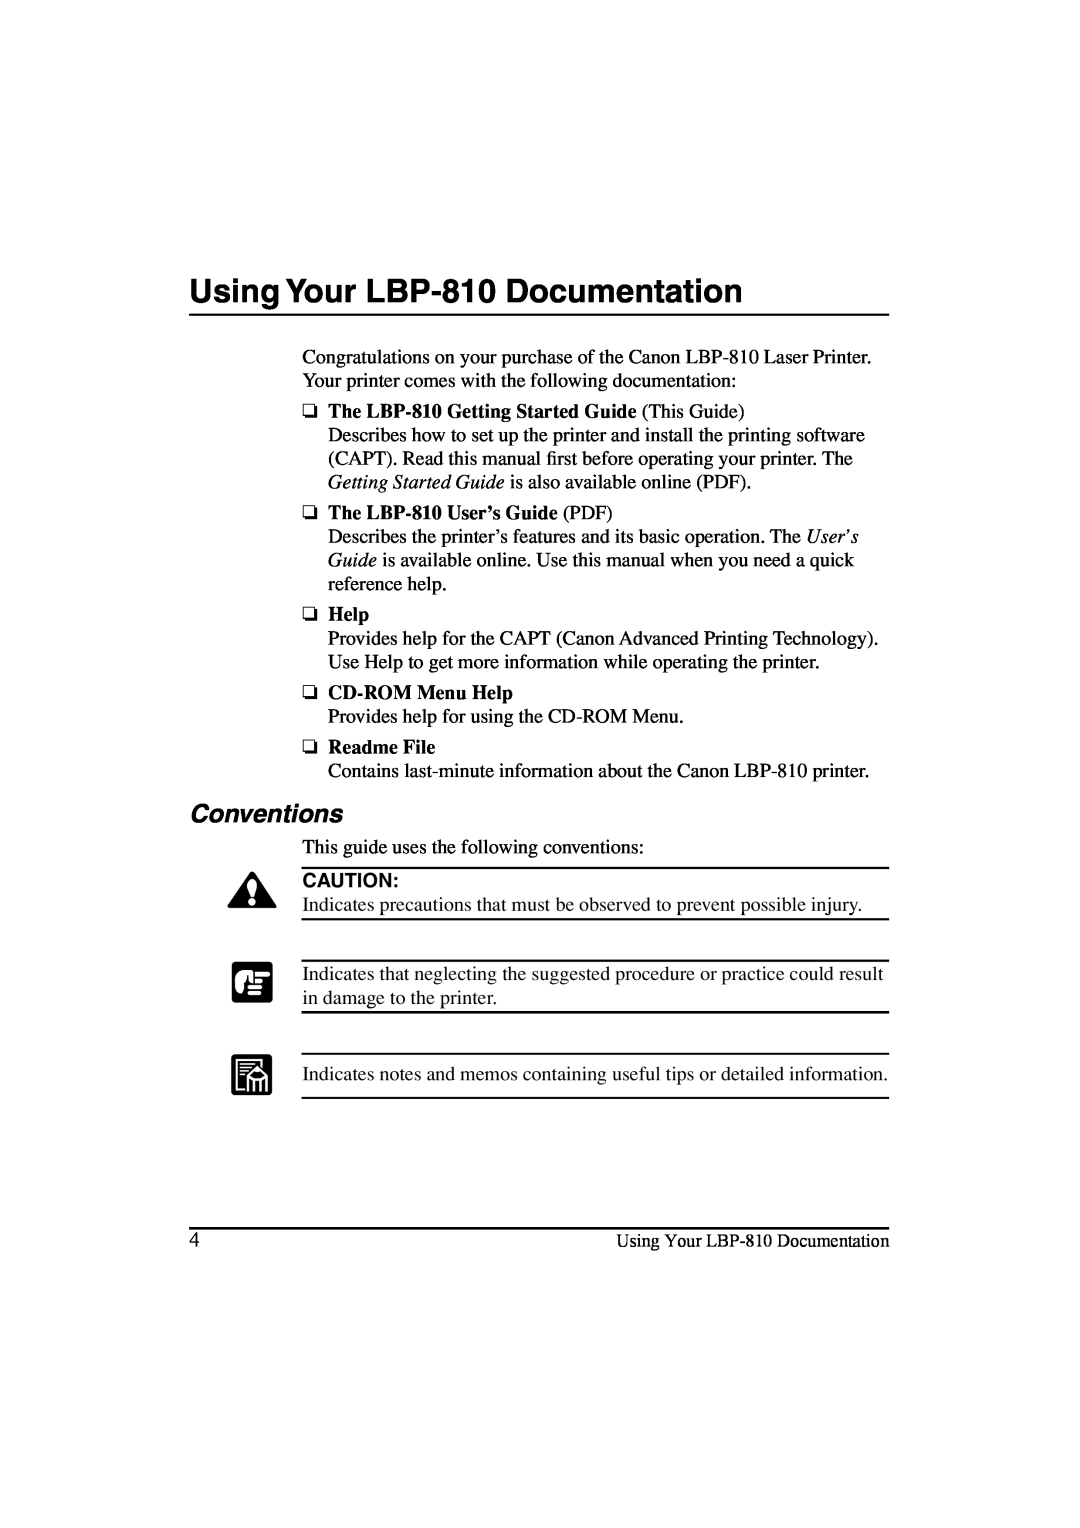 Canon manual Using Your LBP-810Documentation, Conventions 